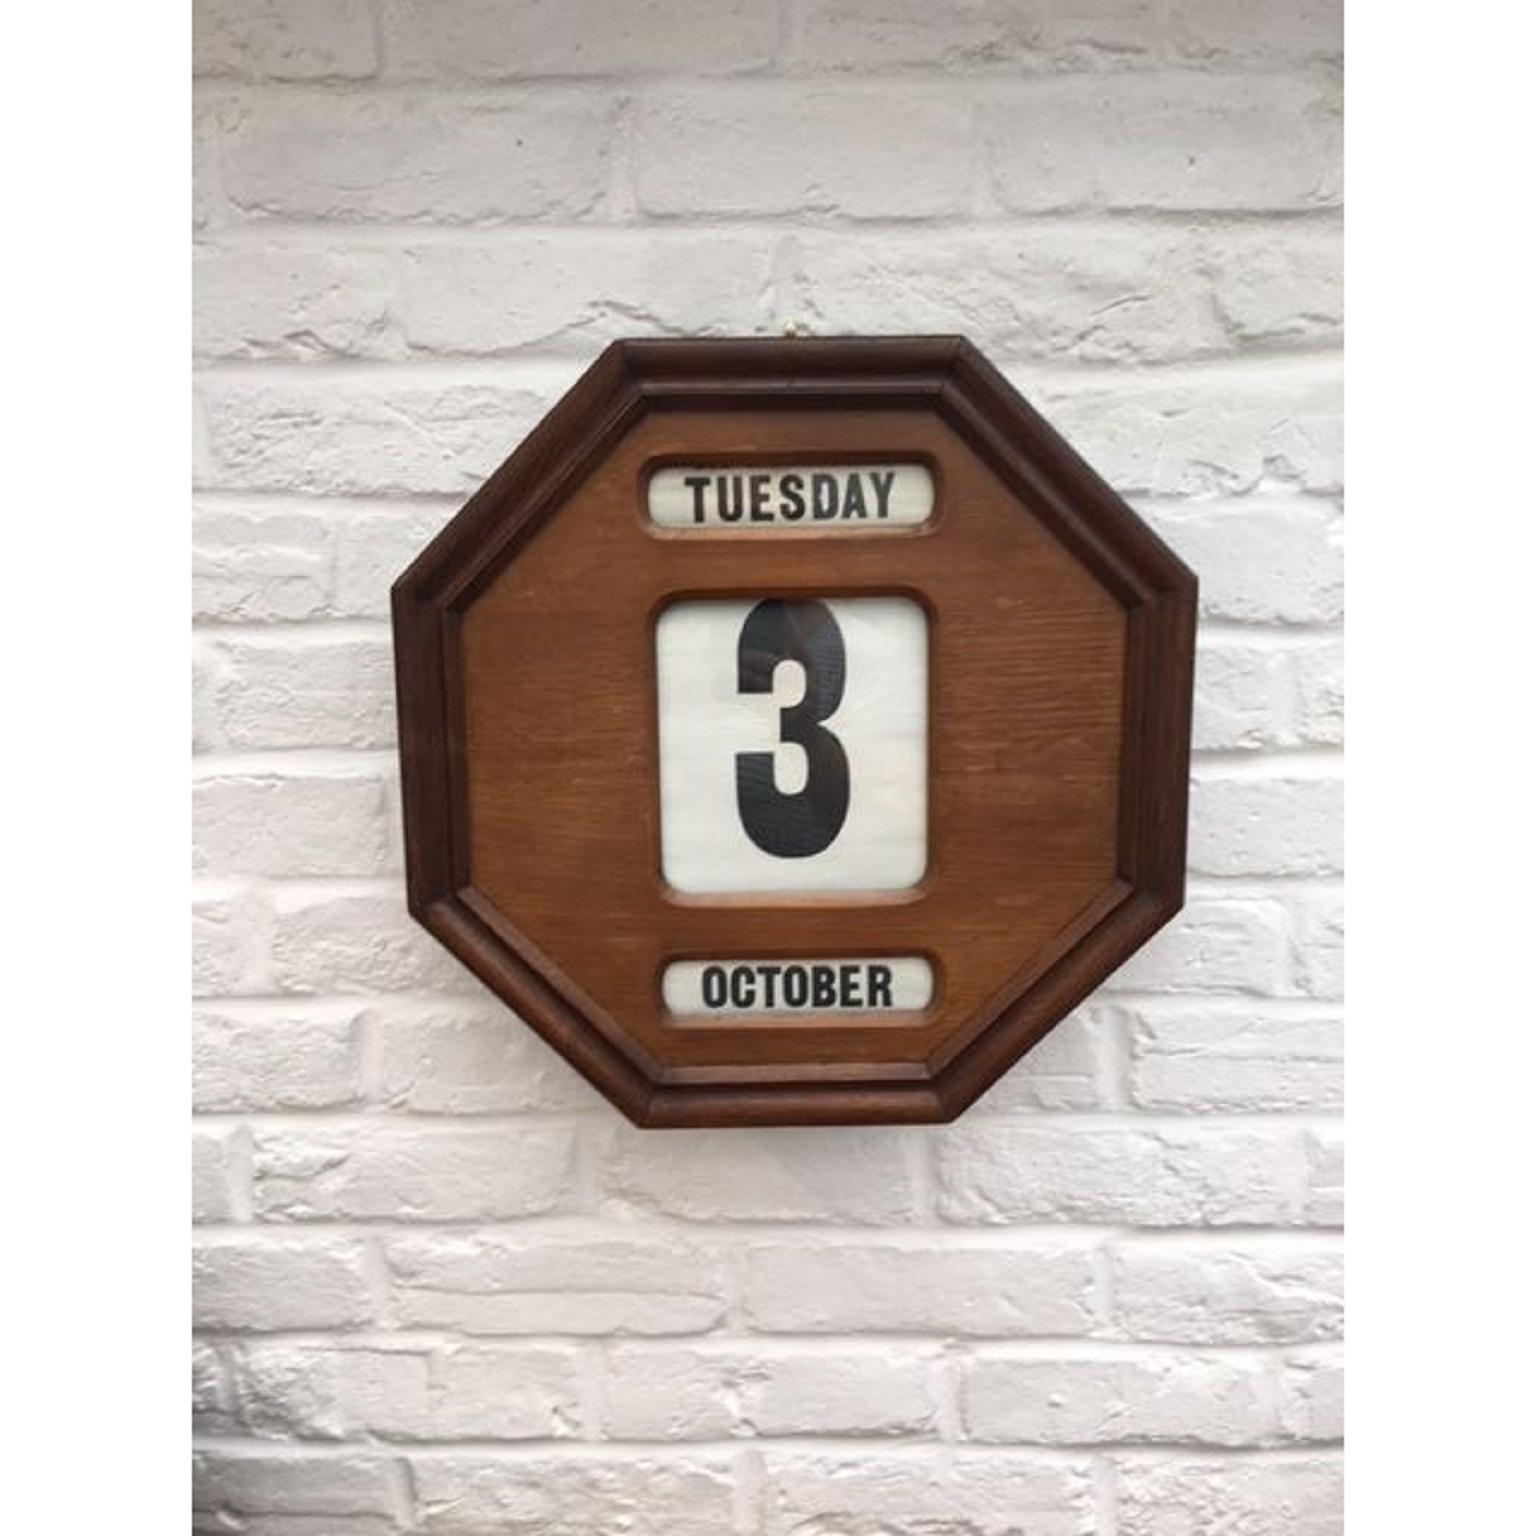 Beautiful Edwardian Mahogany Perpetual hexagonal wall calendar.

Wall mounted with original fabric spools, behind glazed panels, all 6 adjusters on each side are present and working, changing the day, date and month. Wood has a lovely patina. Good